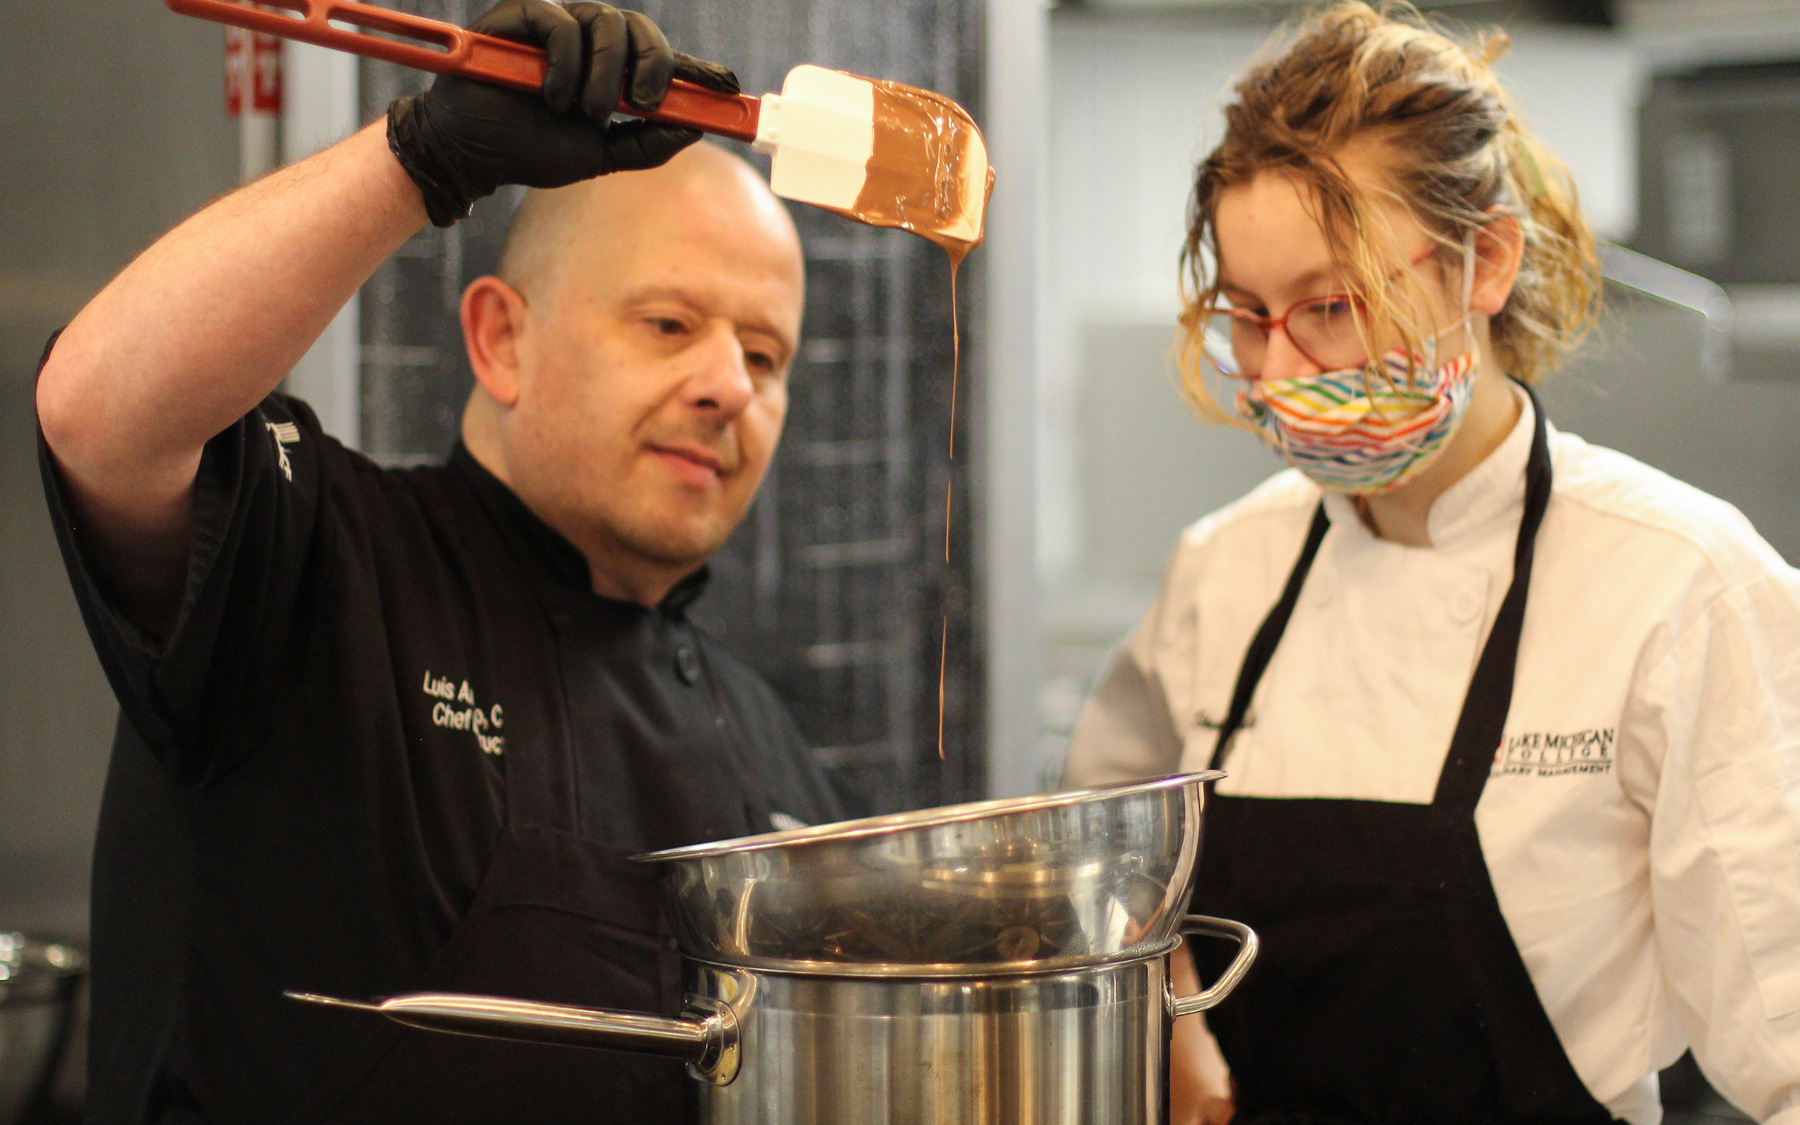 Chef Stirring chocolate with a student.